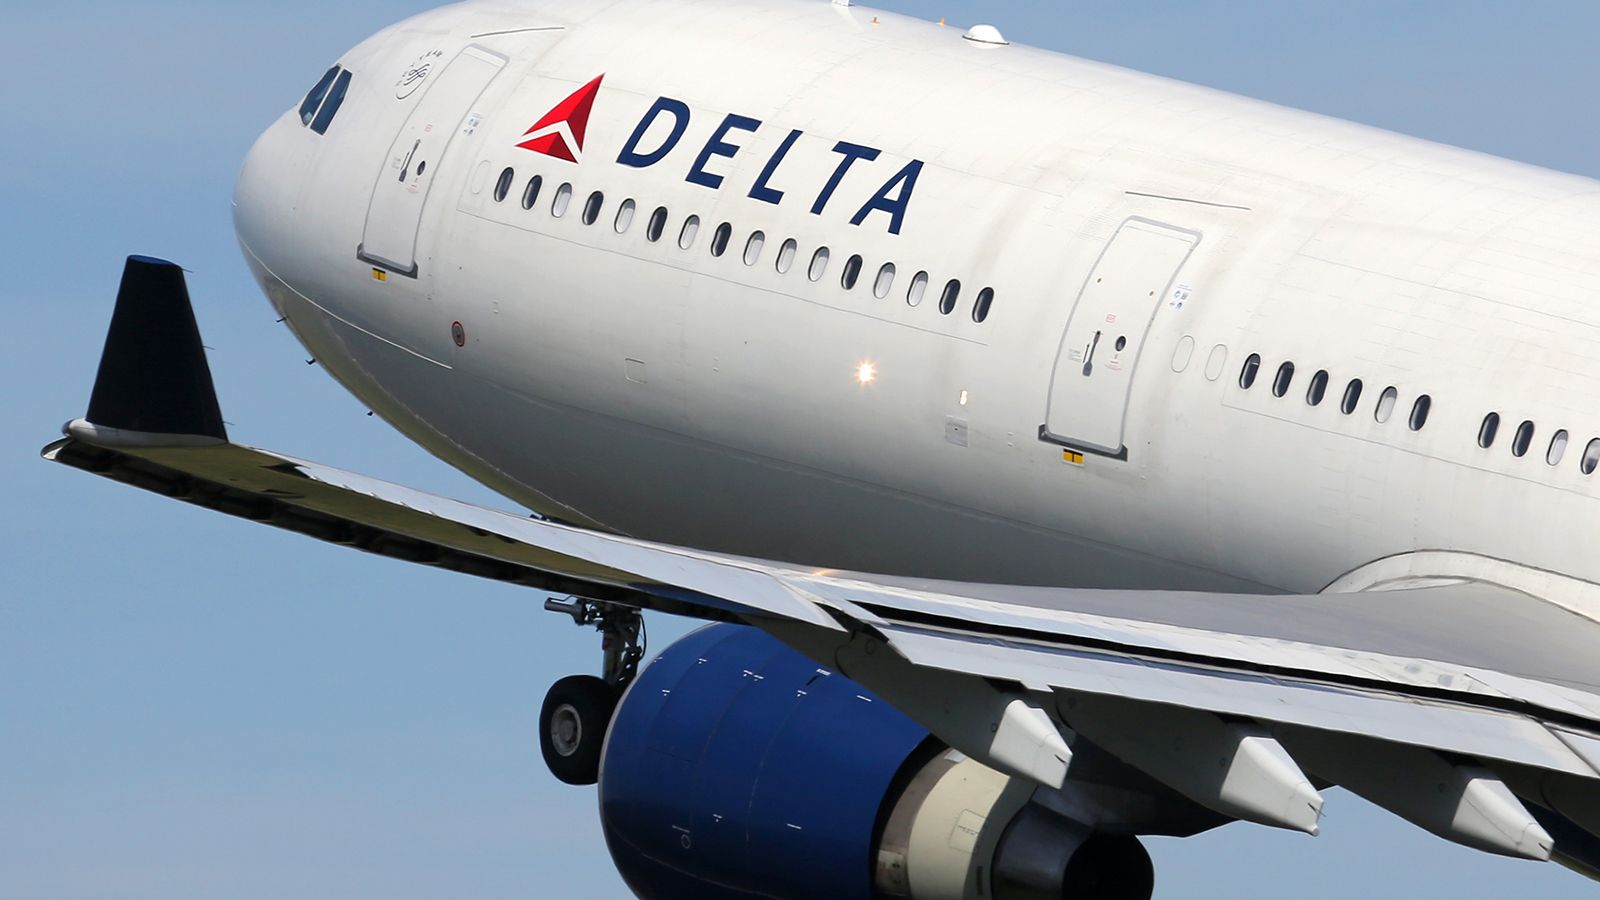 Delta credit card offers: Up to 110,000 bonus miles